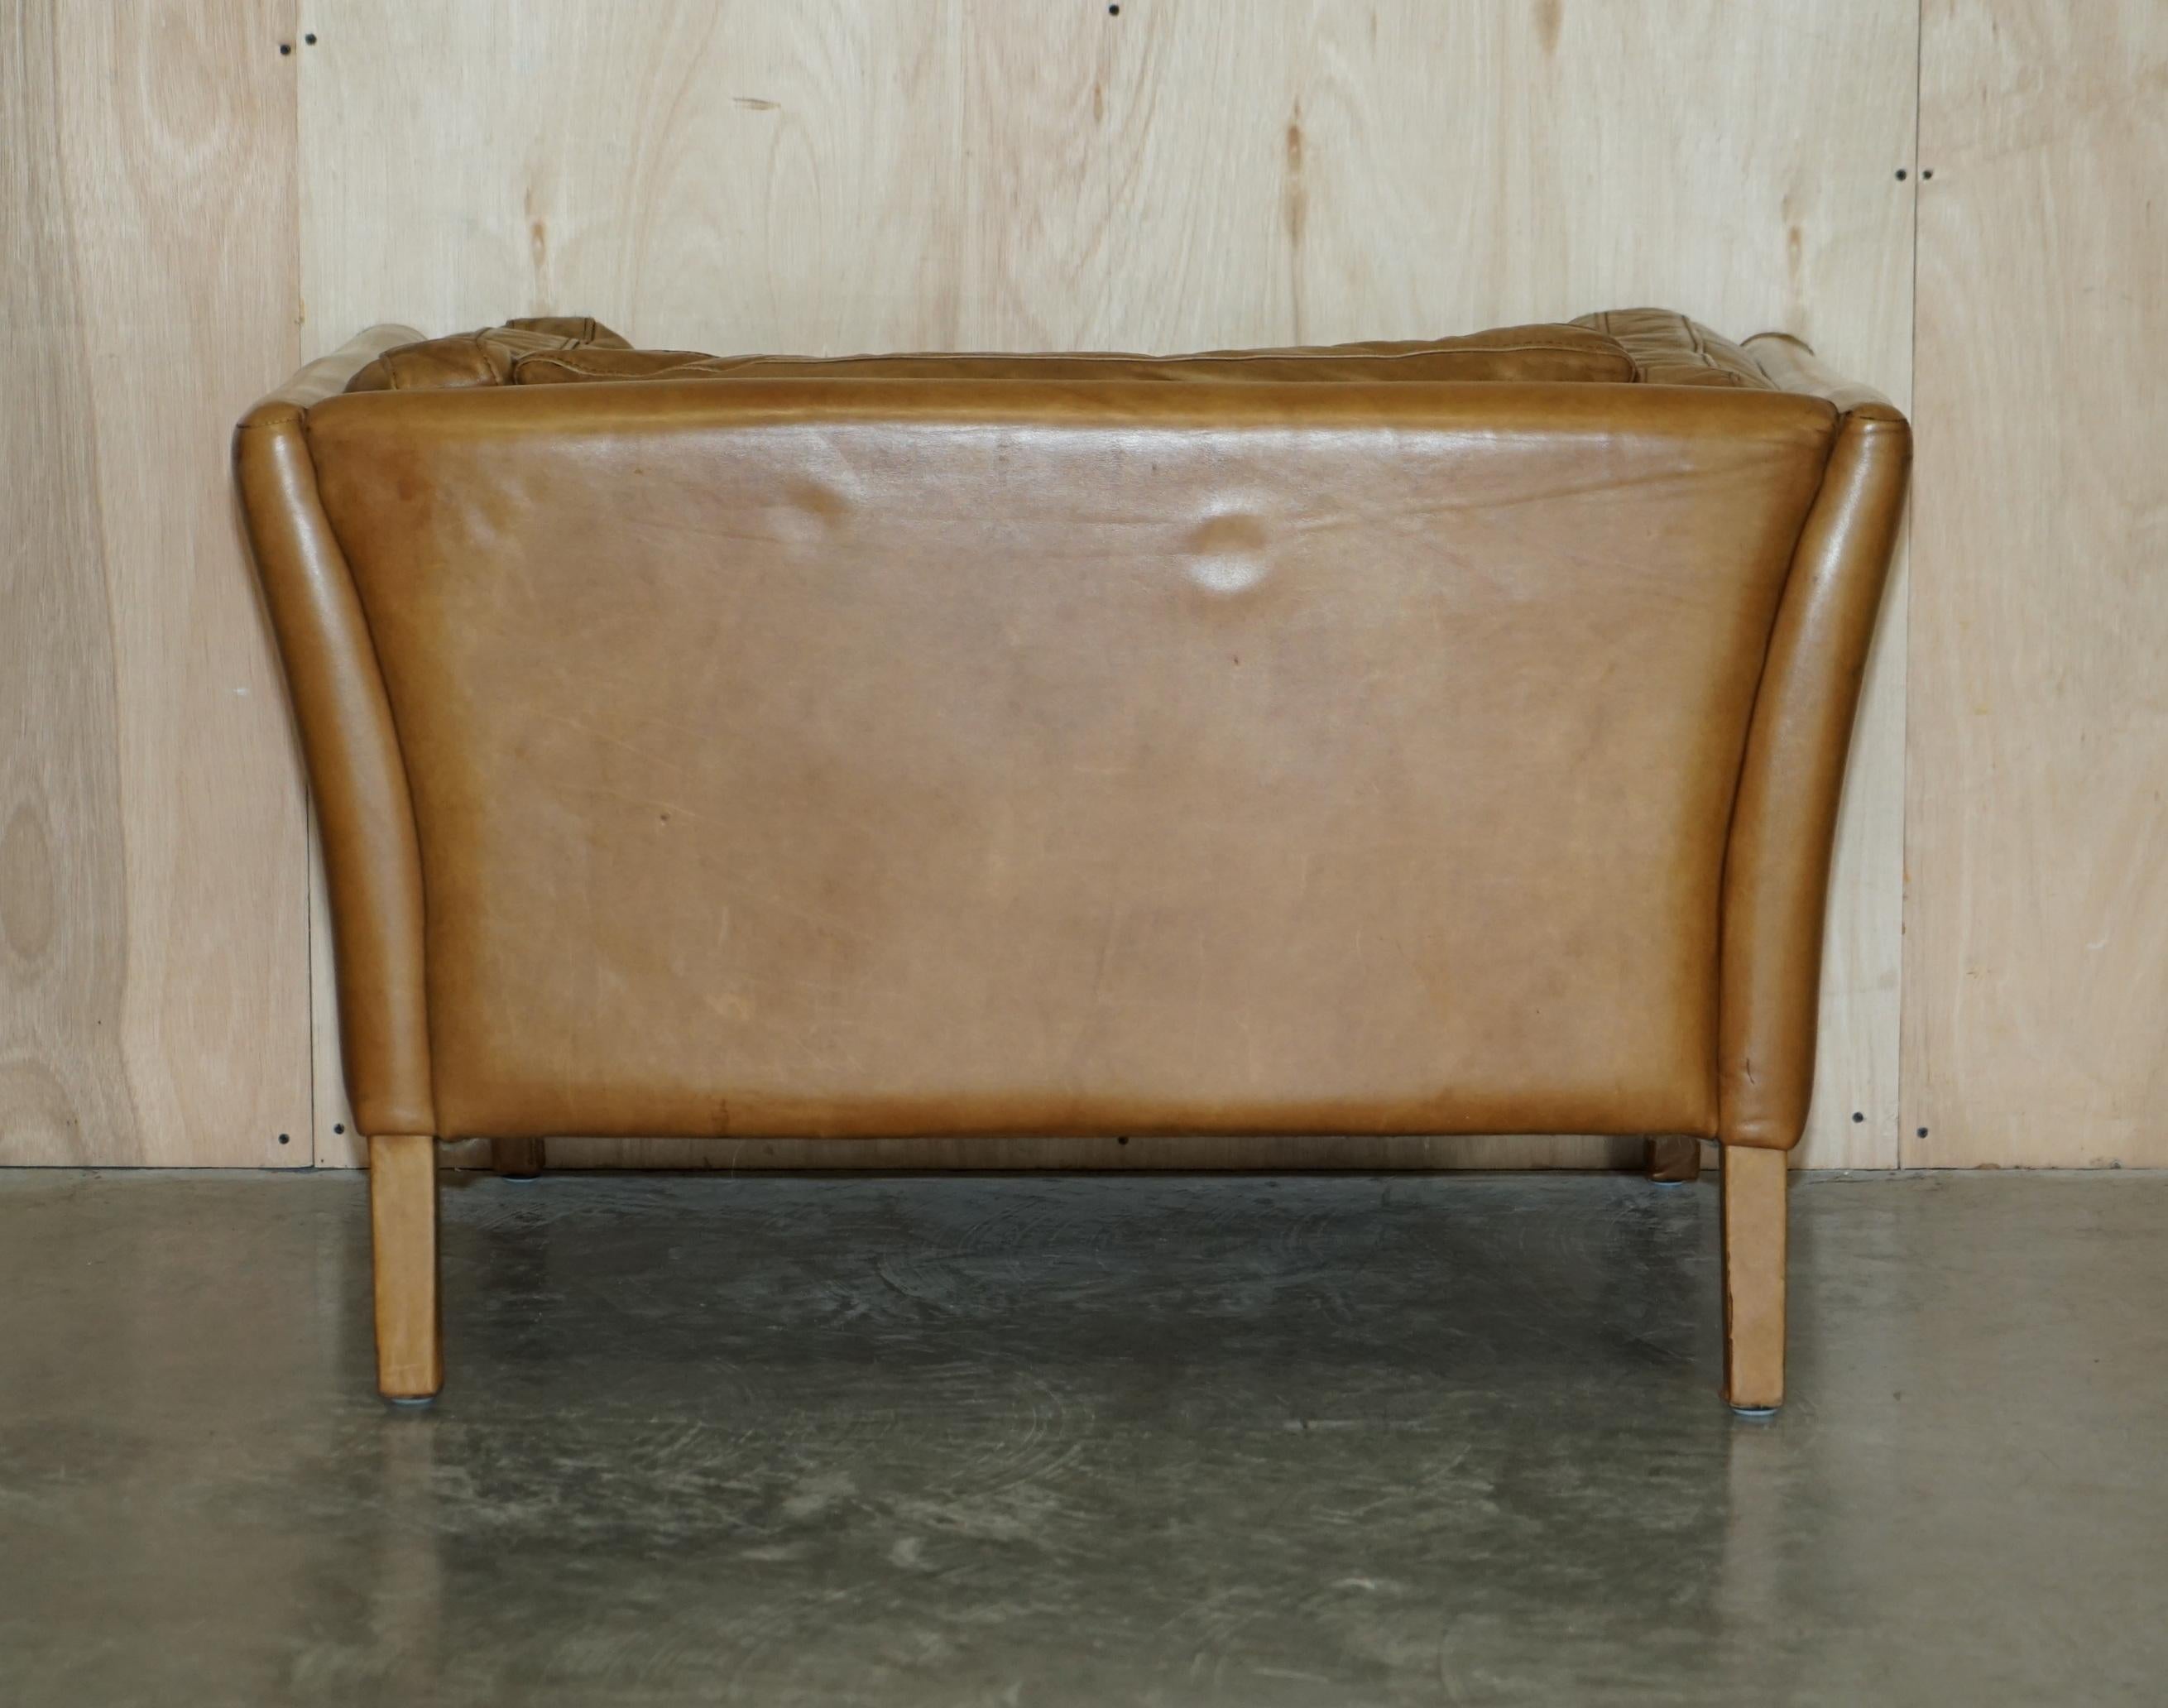 Super Comfortable Halo Groucho Tan Brown Leather Love Seat Armchair John Lewis 2